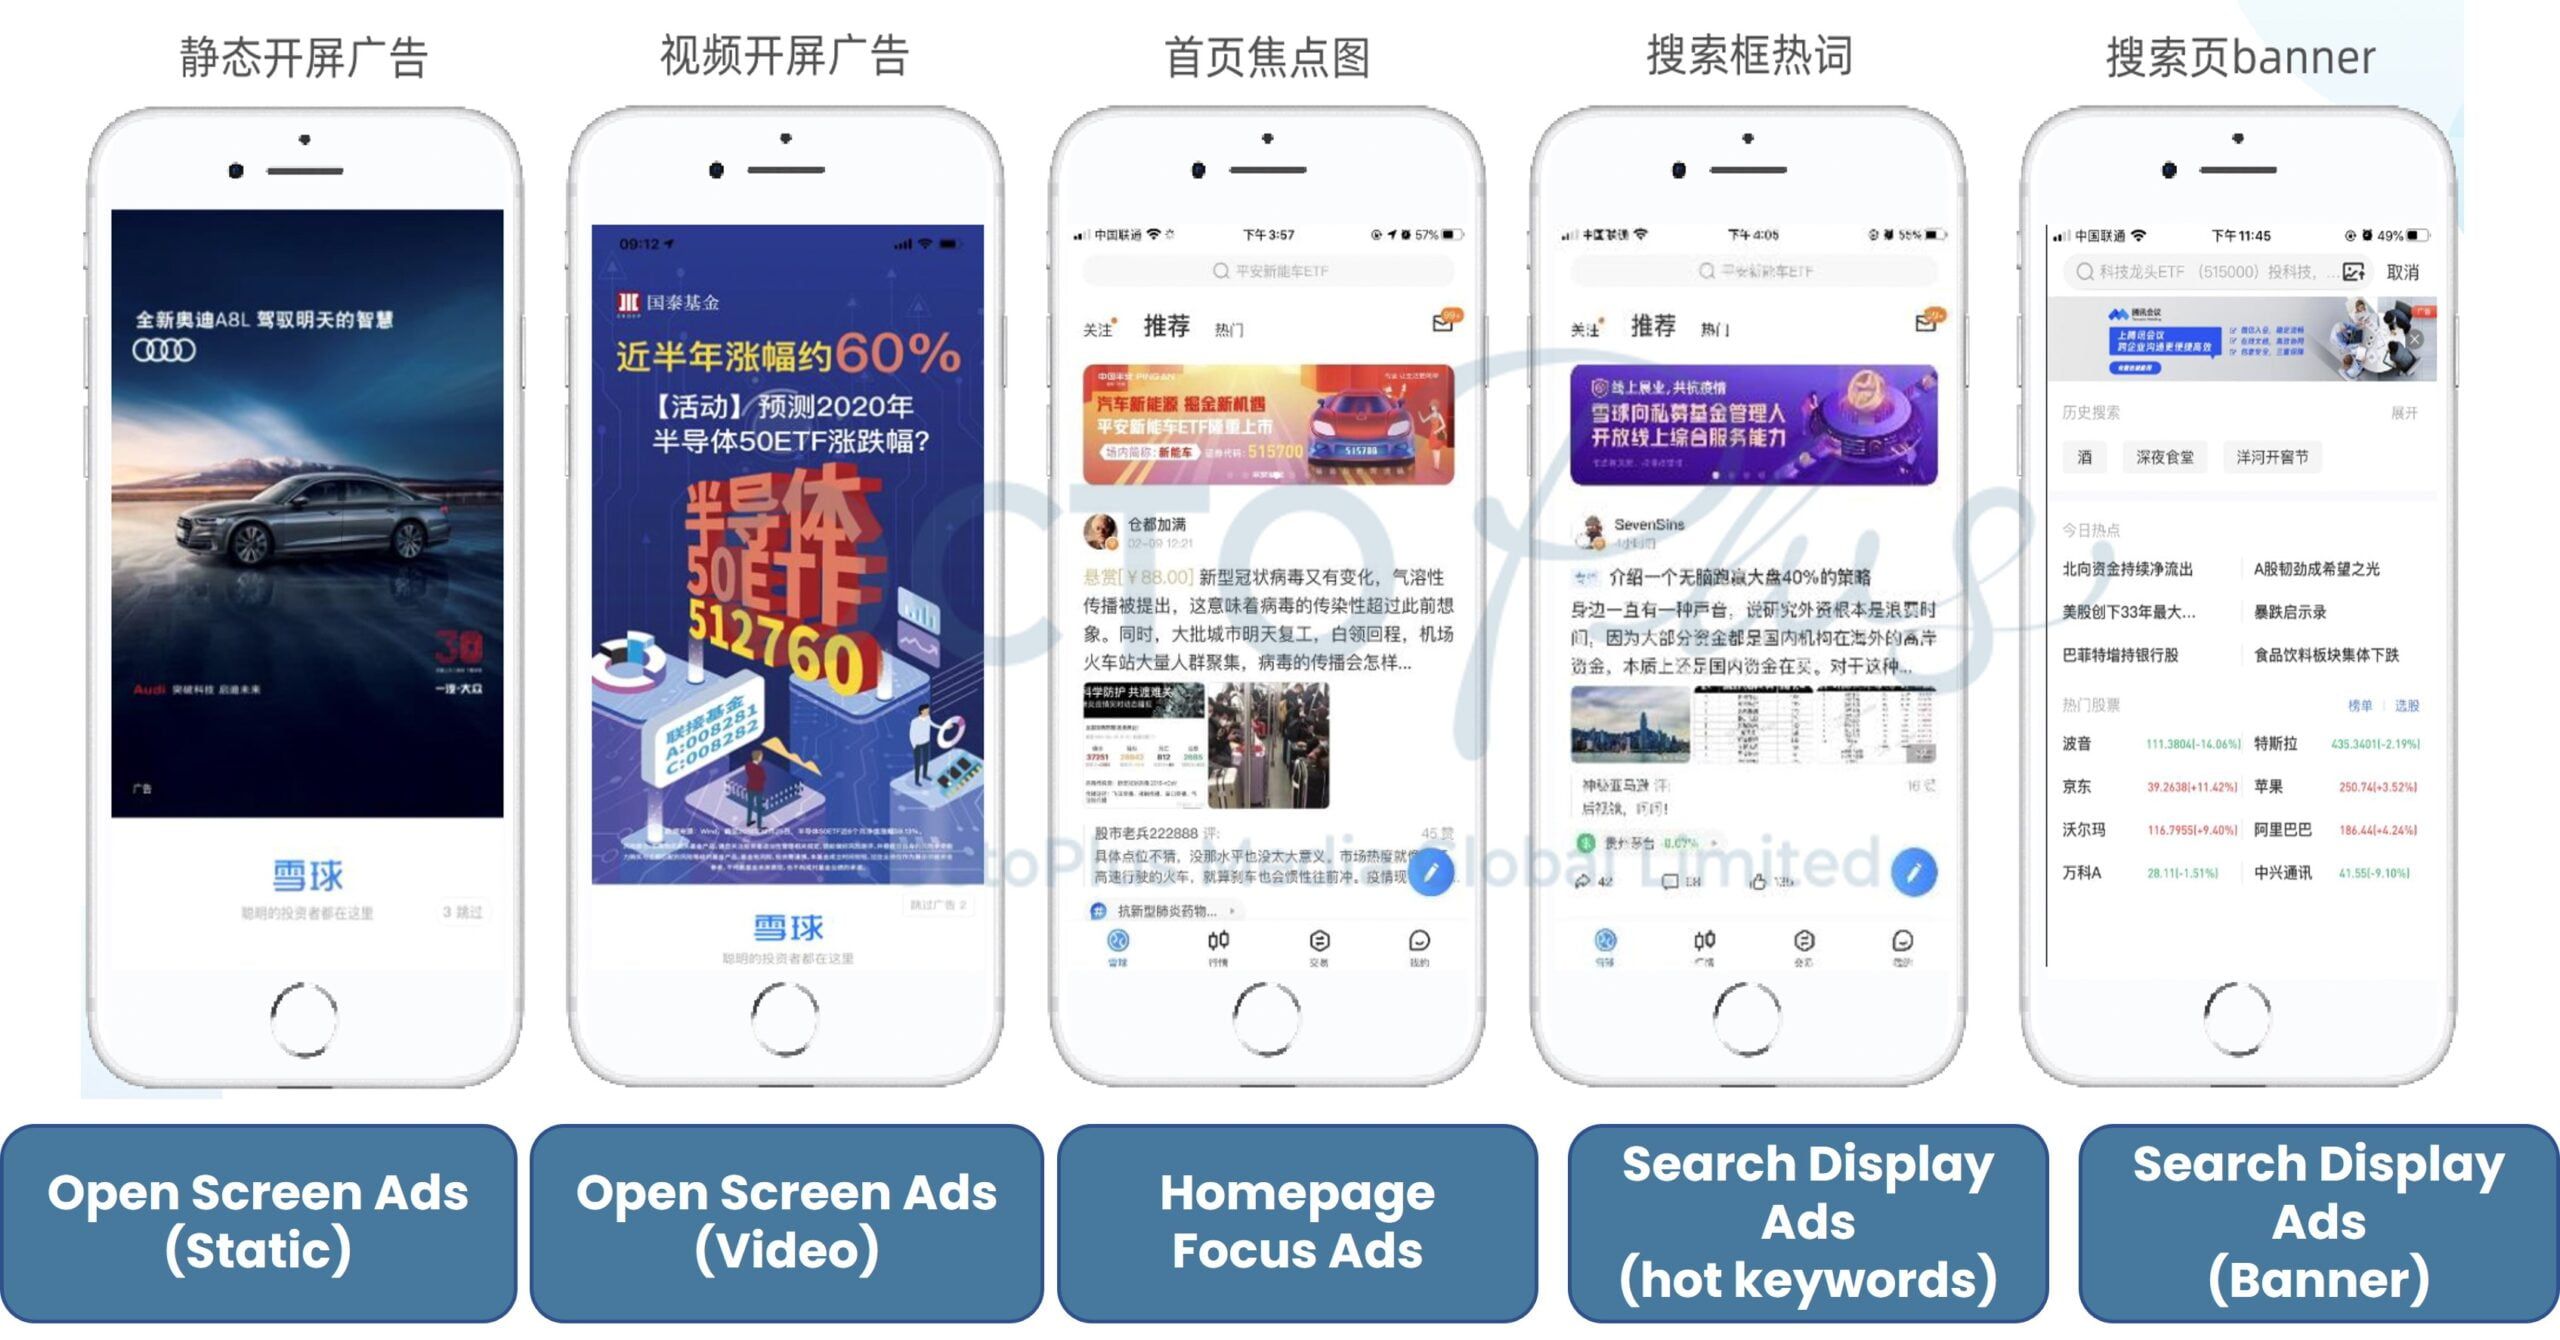 Snowball Exposure category: Open screen, Focus ad, Search display advertising